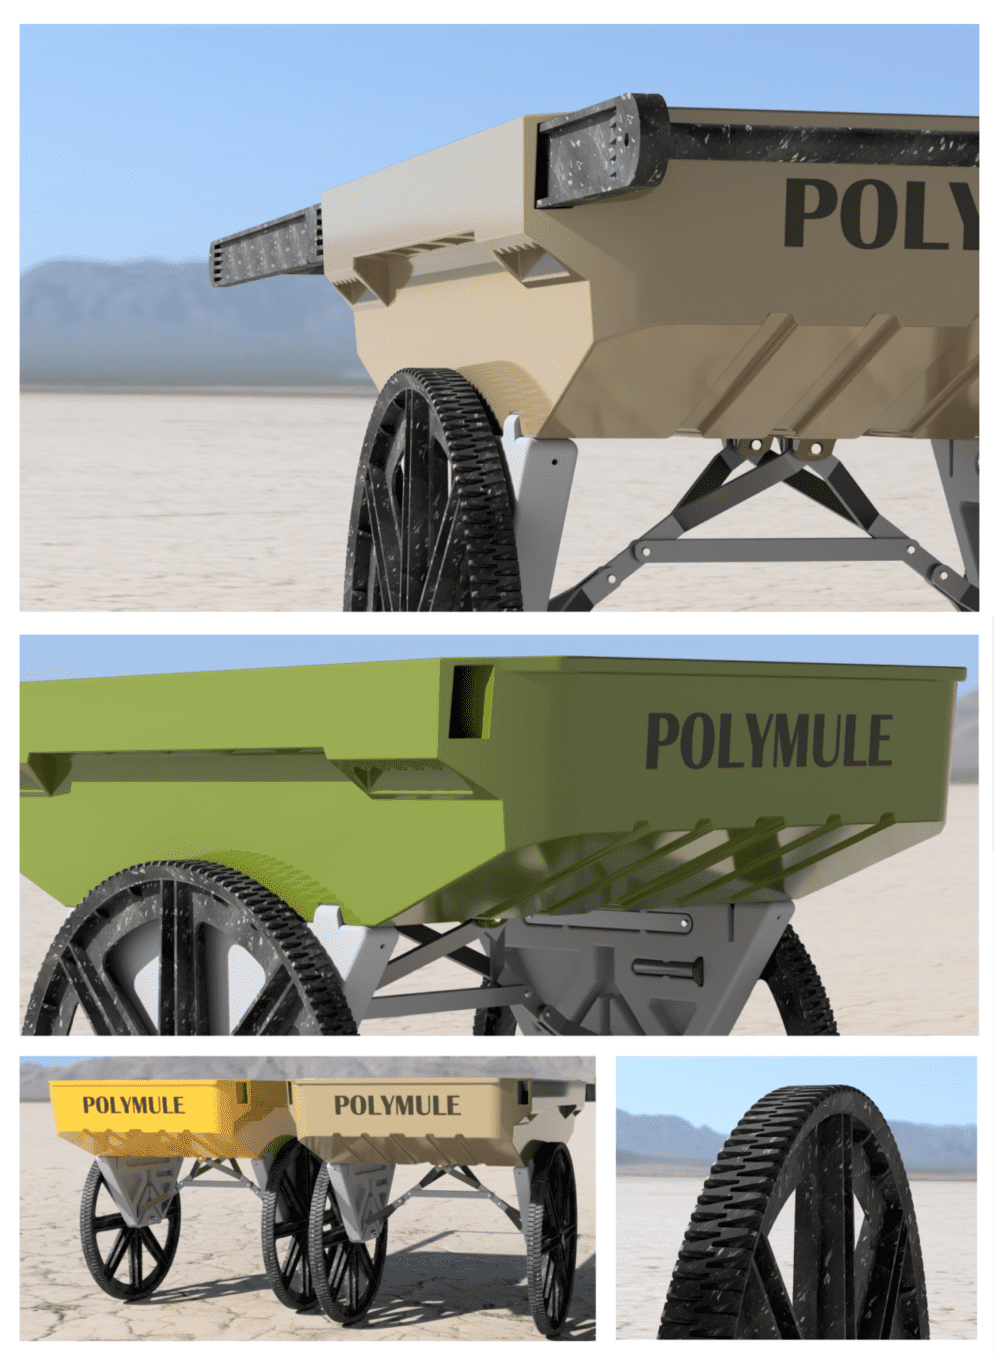 POLYMULE-e1523736342547.png